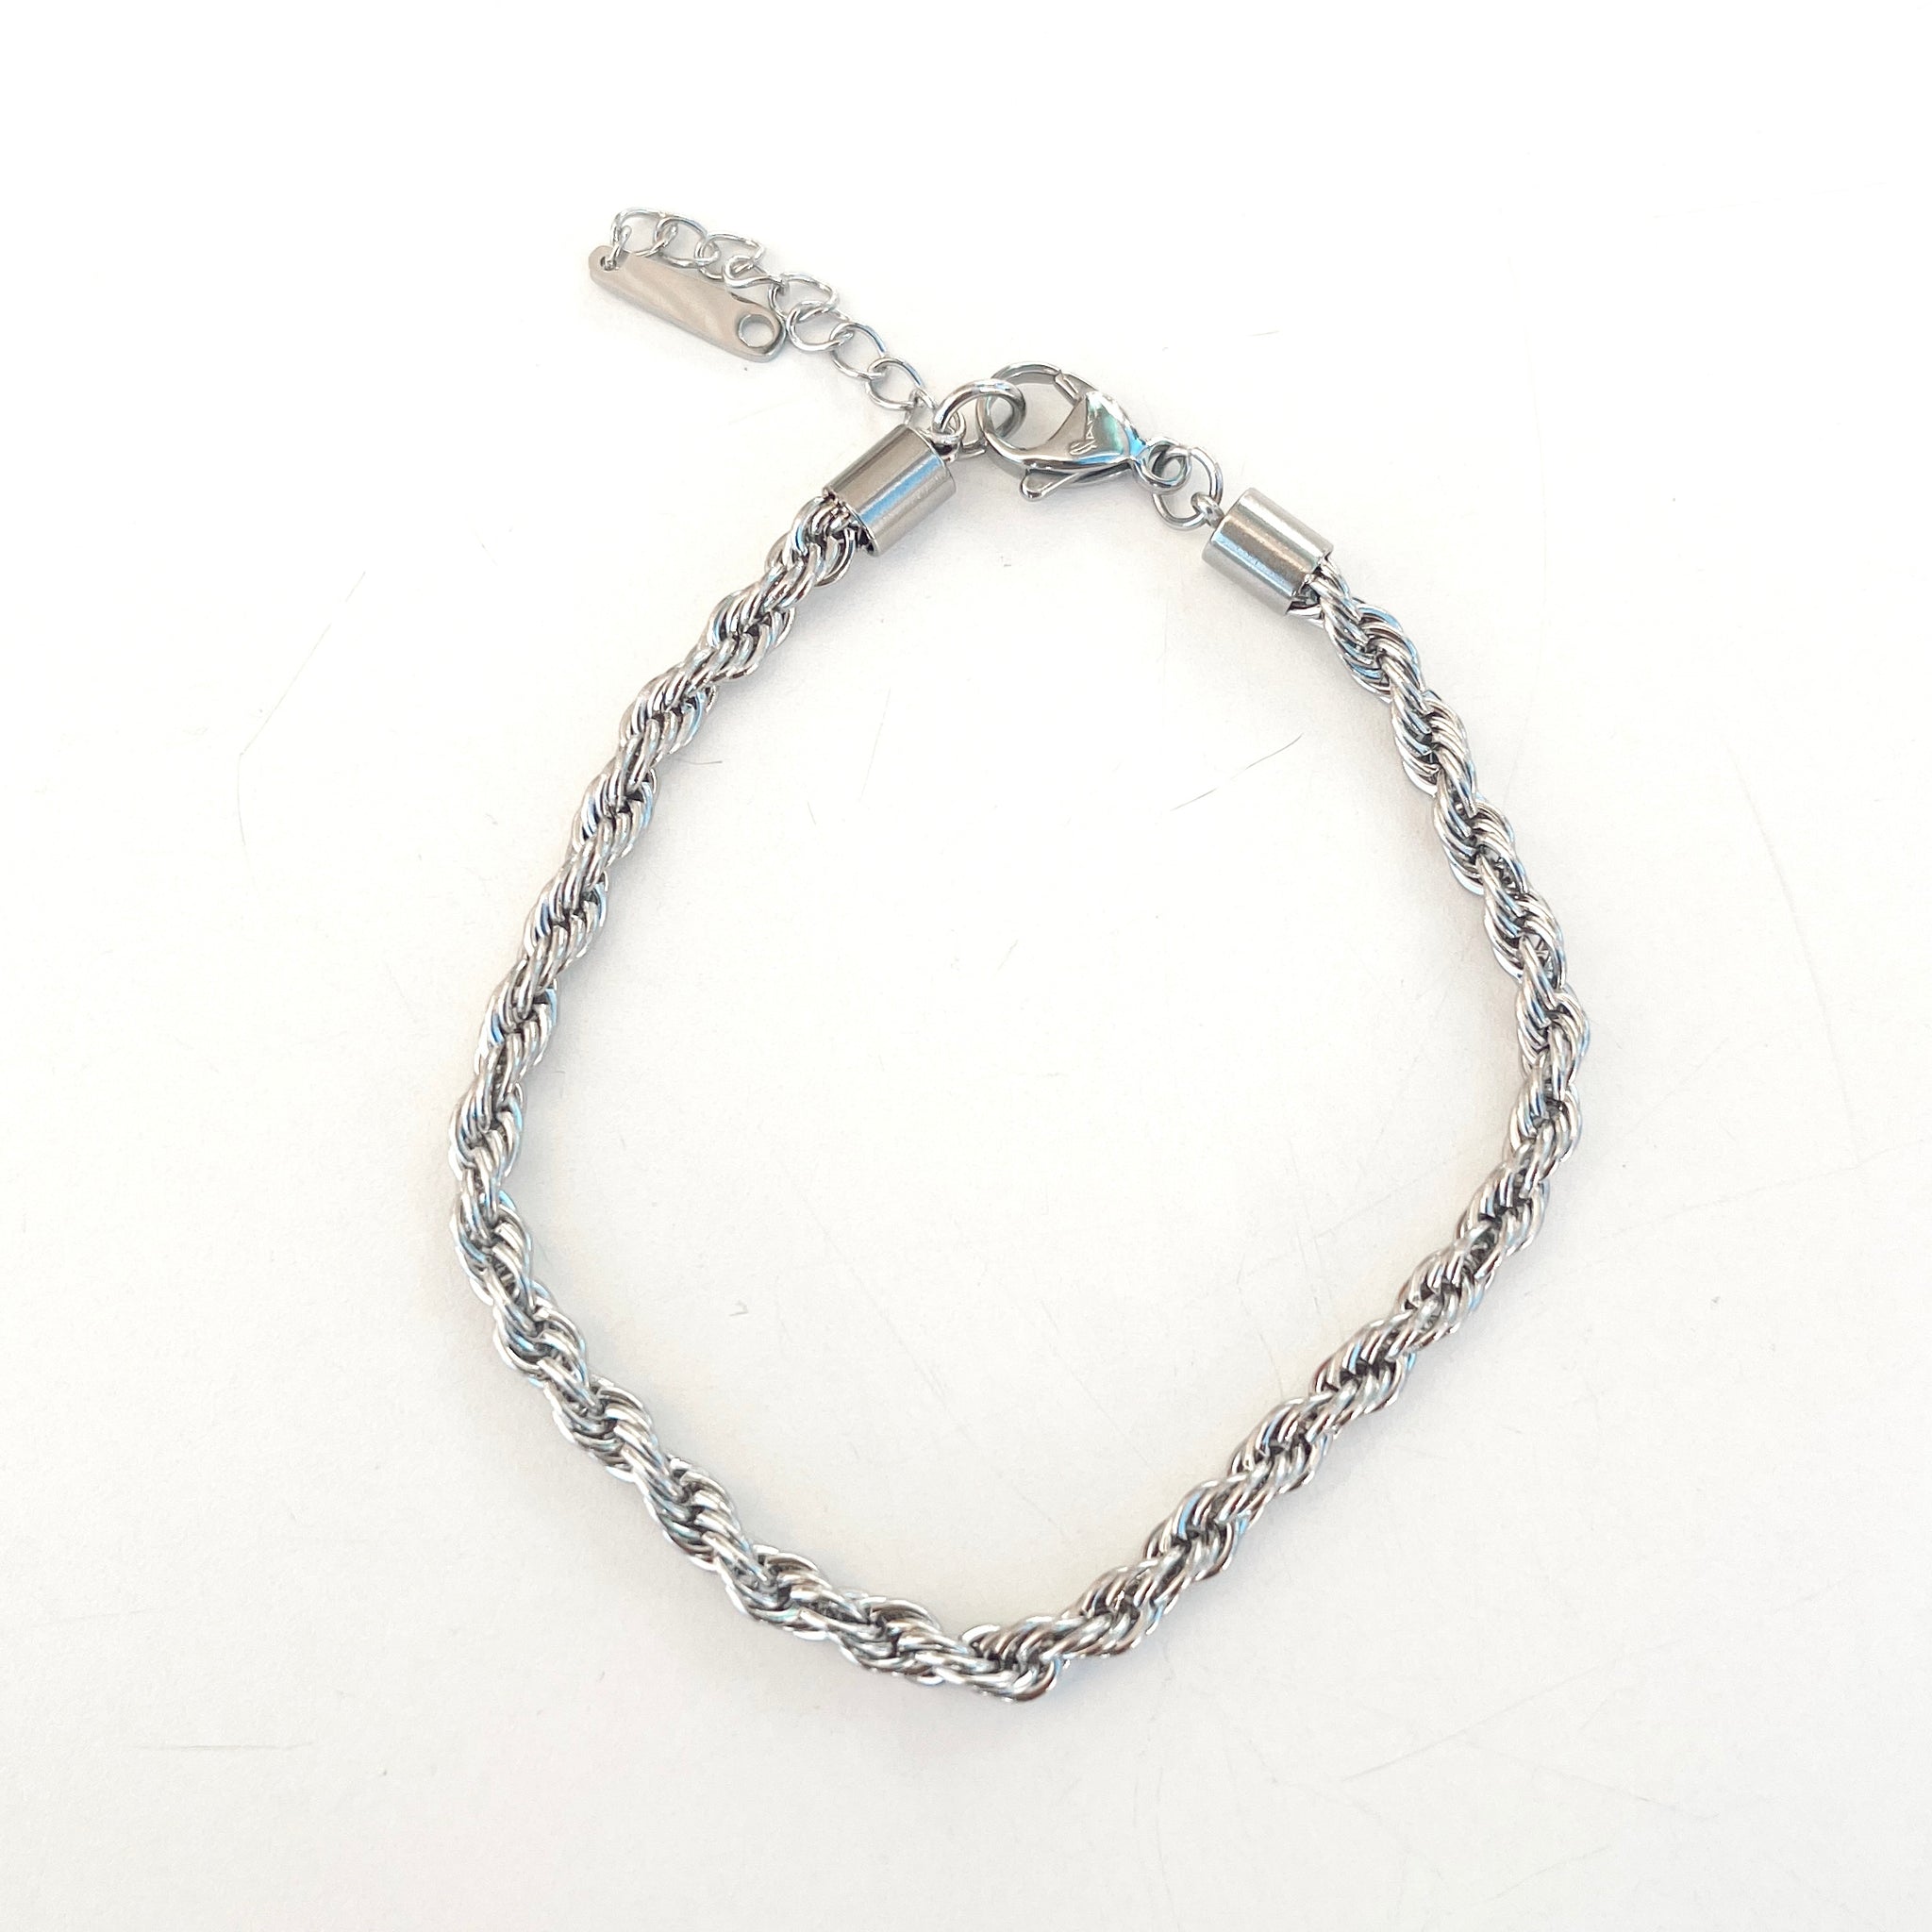 Braided Chain Anklet in Silver - Stainless Steel